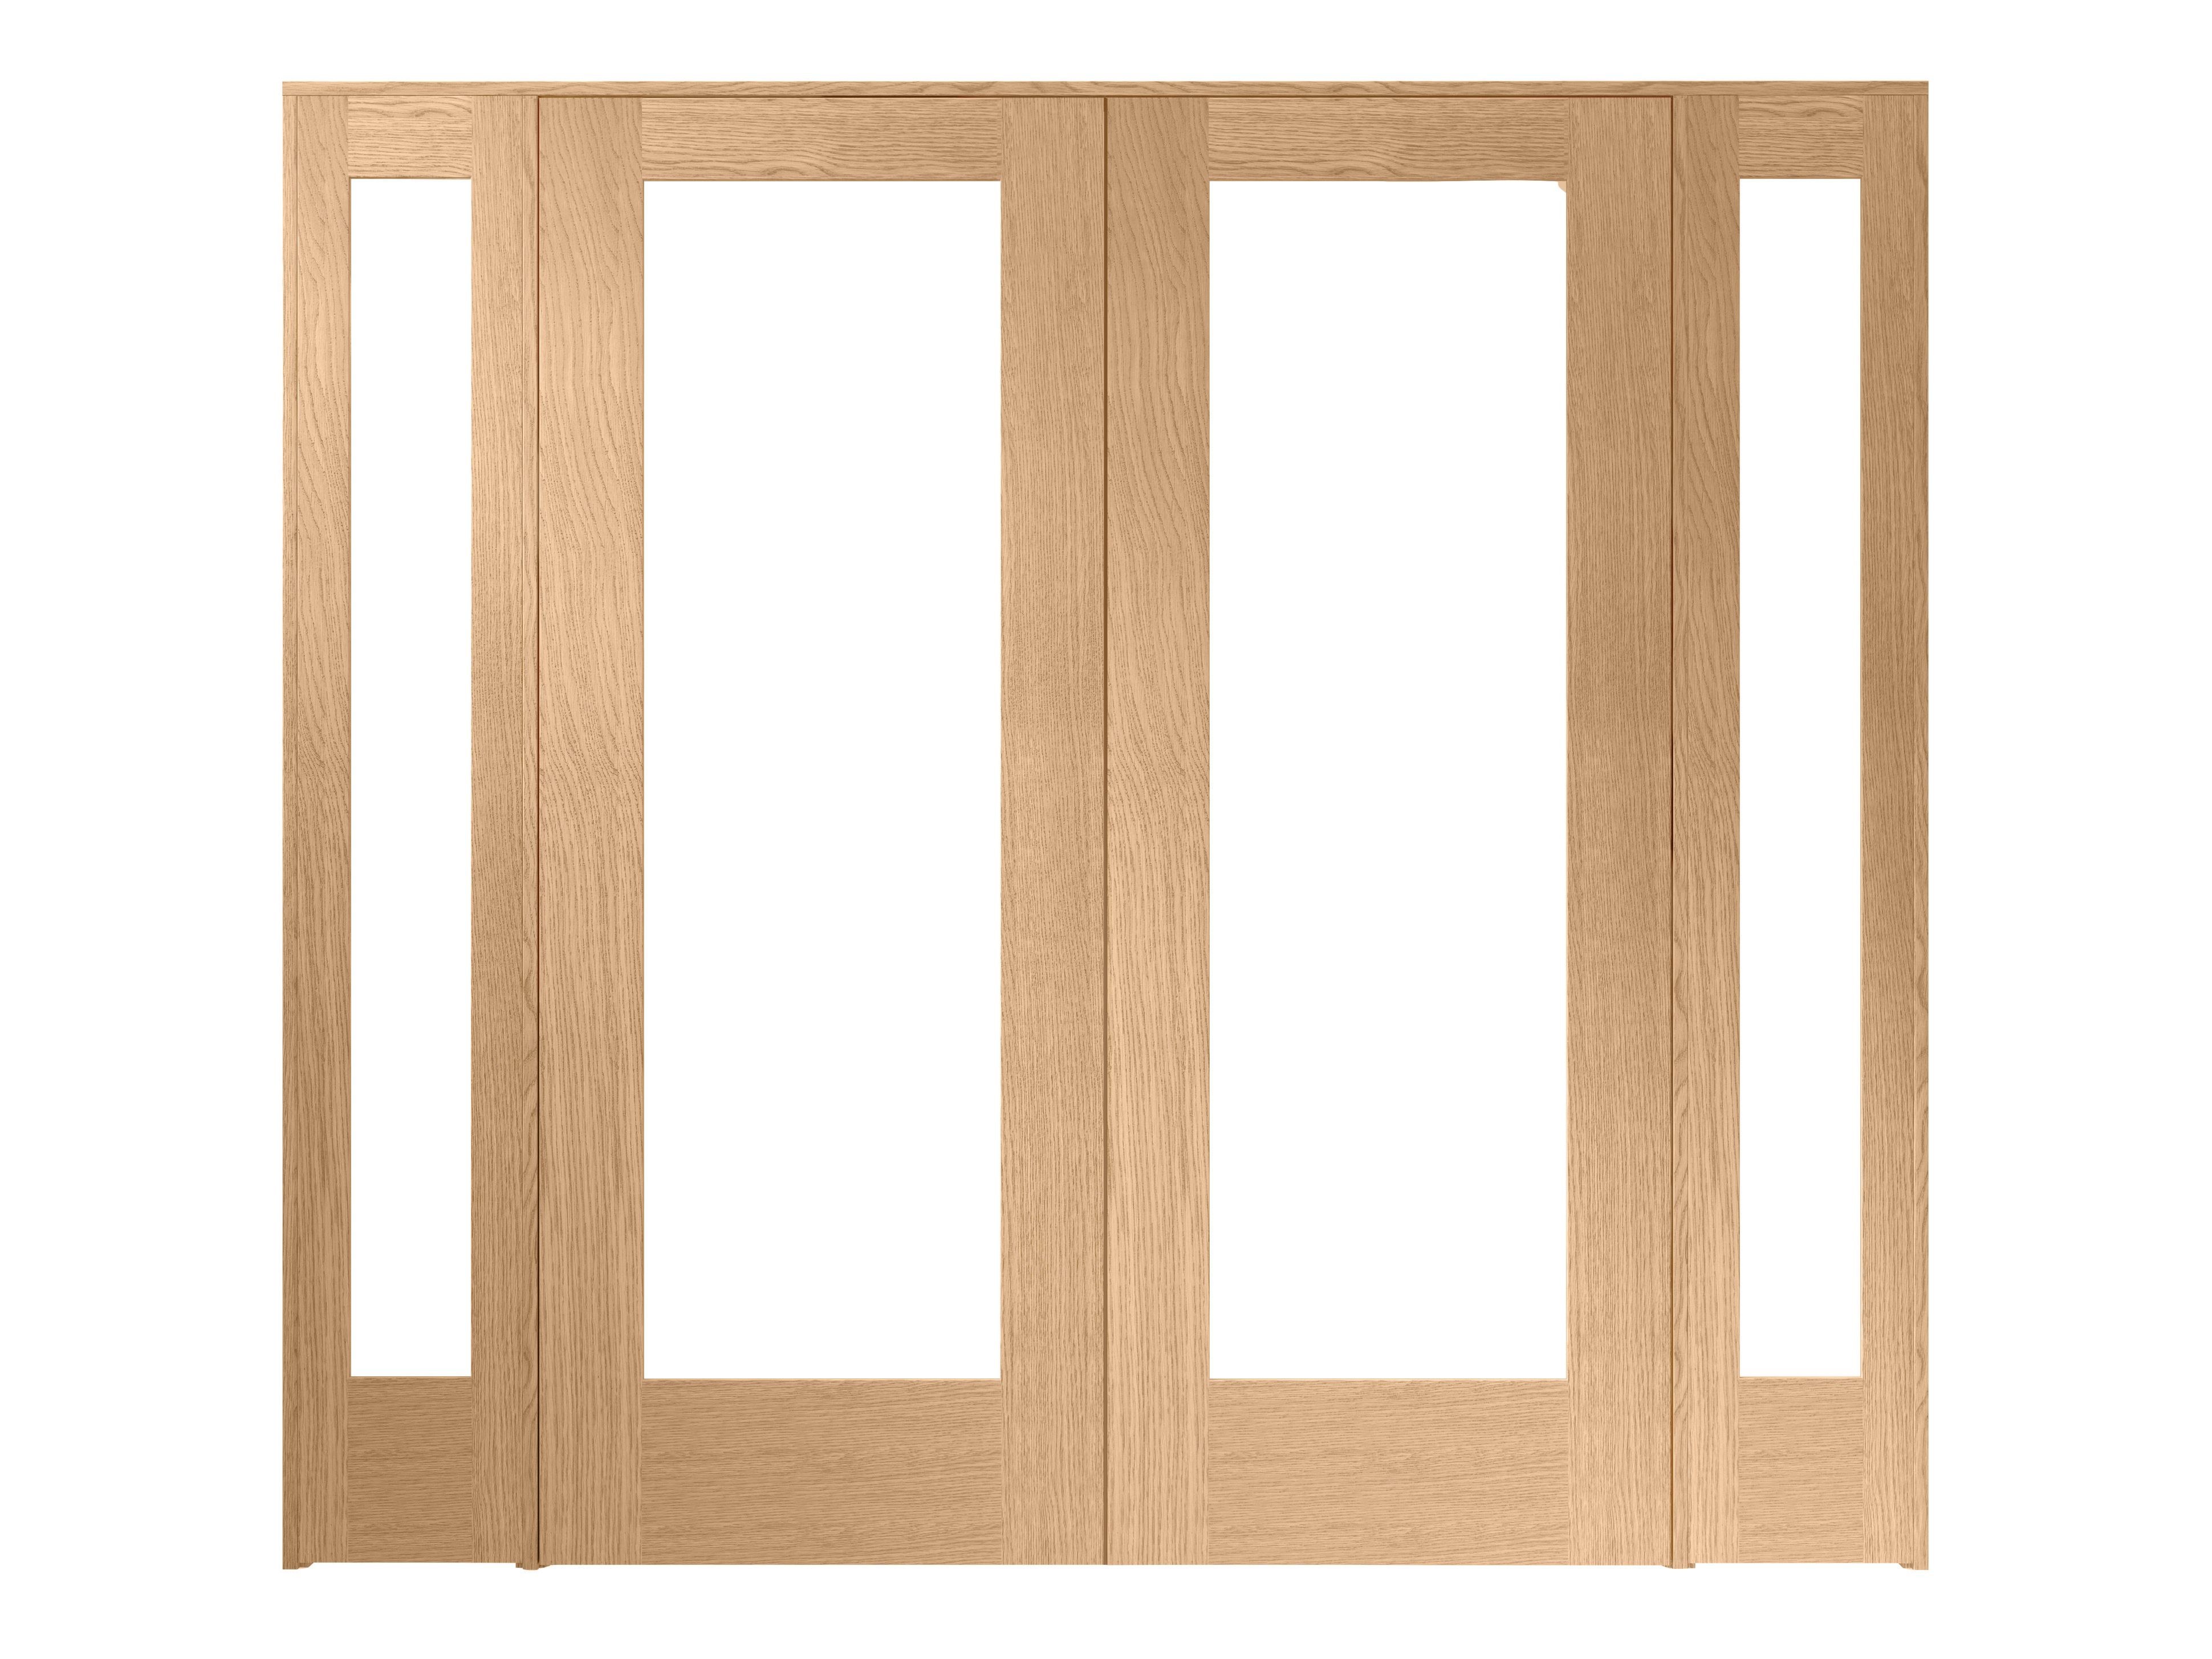 Image of Wickes Oxford Fully Glazed Oak Internal Room Divider Doors with 2 Demi Panels - 2017 x 2232mm